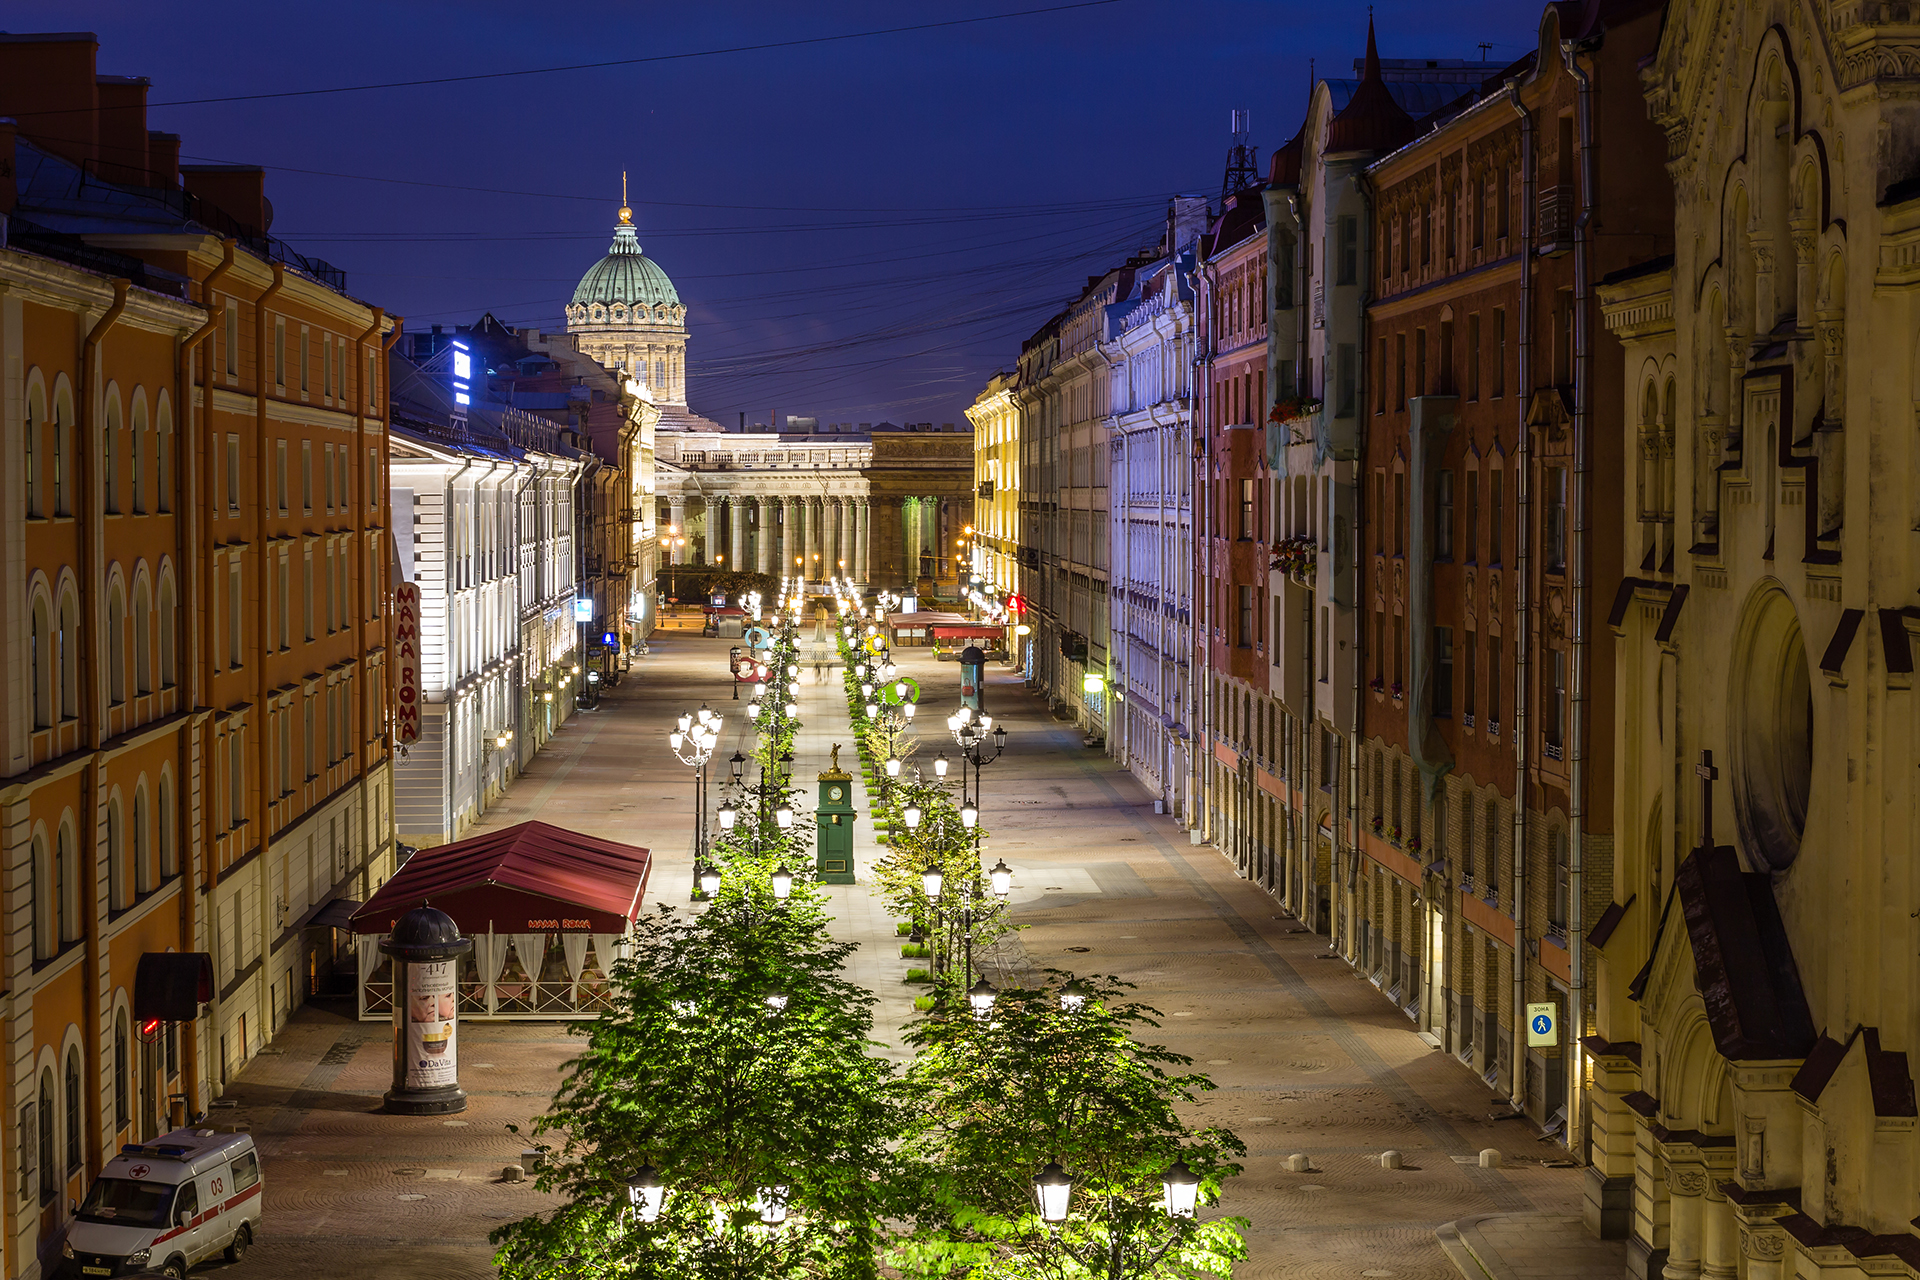 St. Petersburg is much more than just a vibrant city: it’s a never-ending feast. From its wide avenues to its ornate remnants from its Imperial past, Russia’s Venice of the North never fails to impress.  